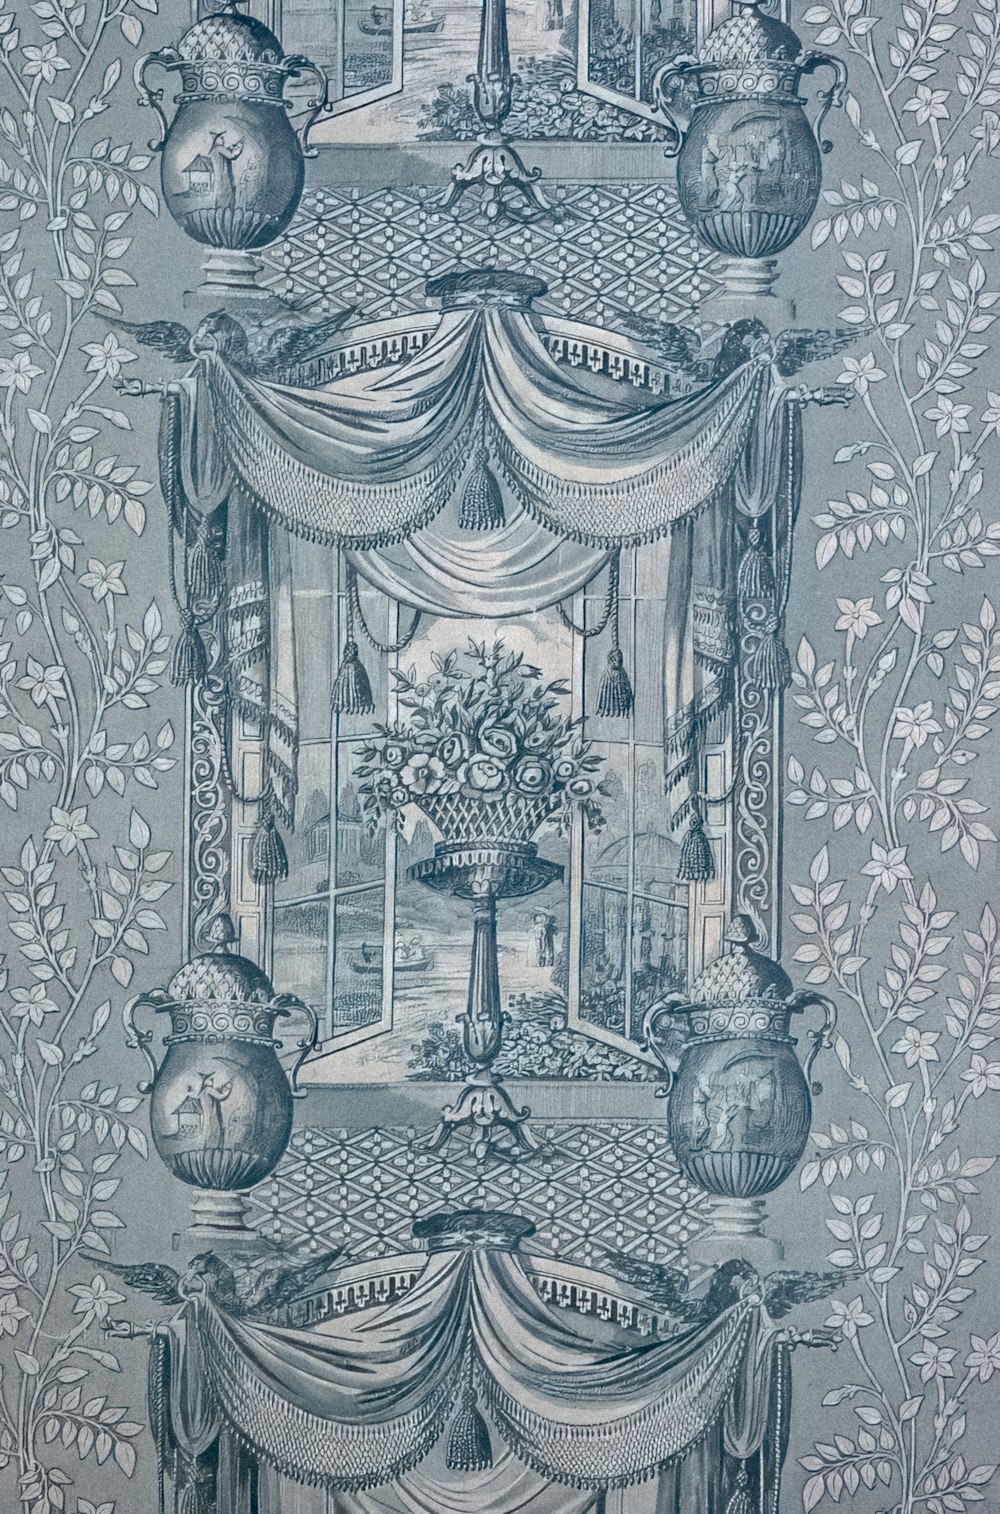 a drawing of a room with curtains and vases